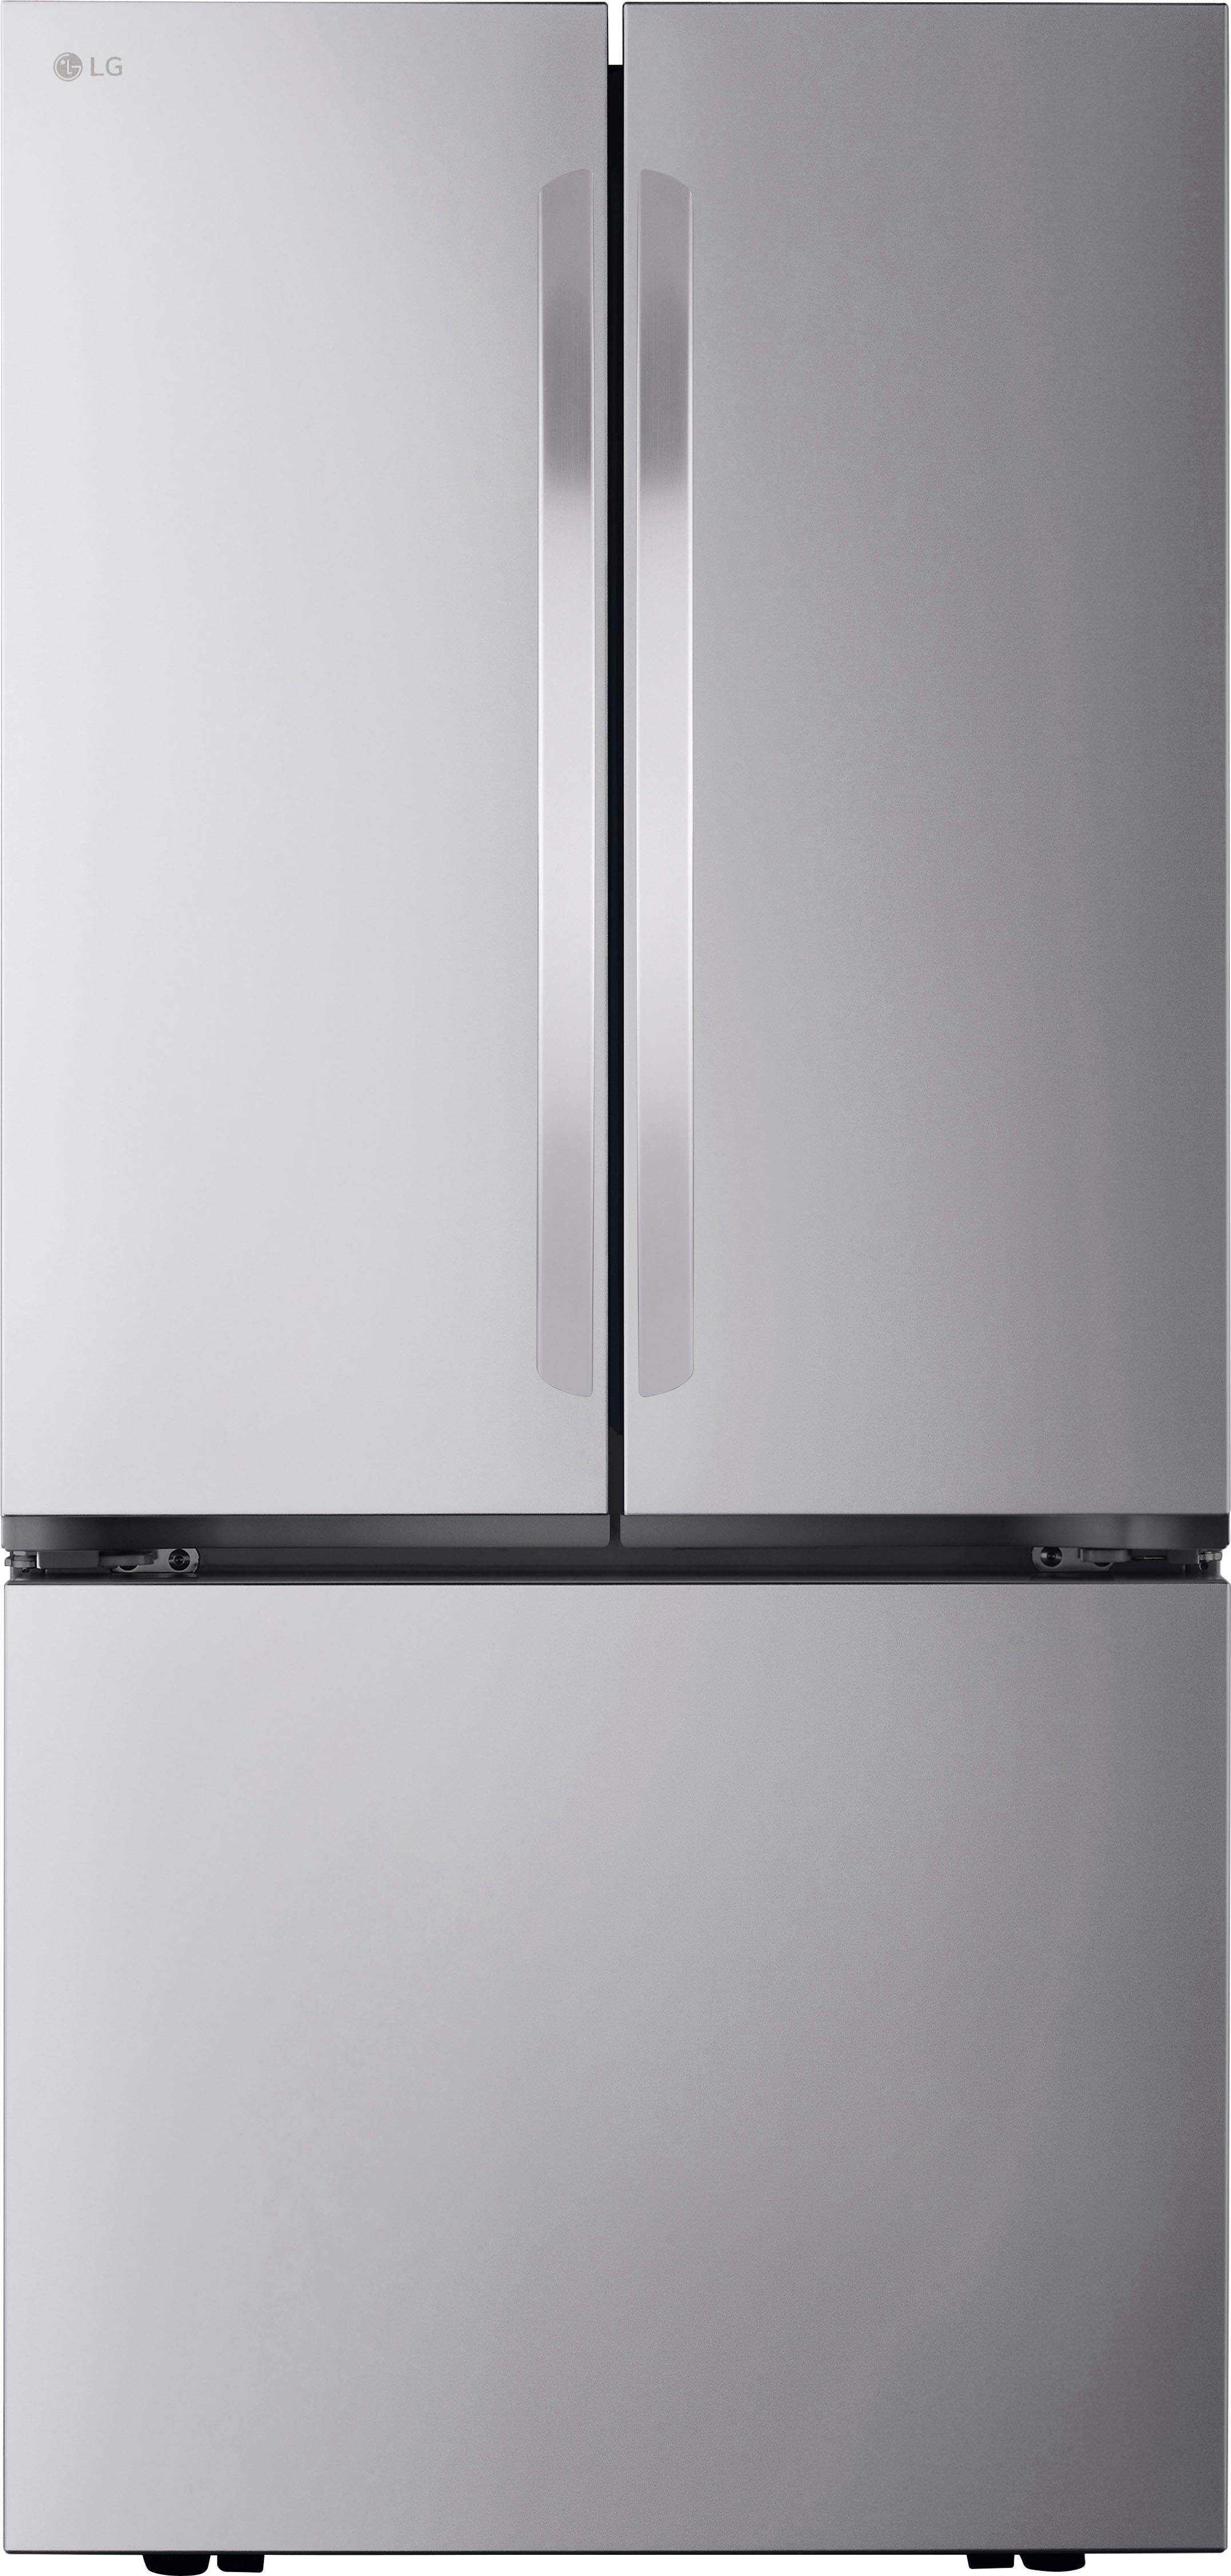 Top 10 small fridges with sleek designs and innovative functions: From  Samsung, LG and more